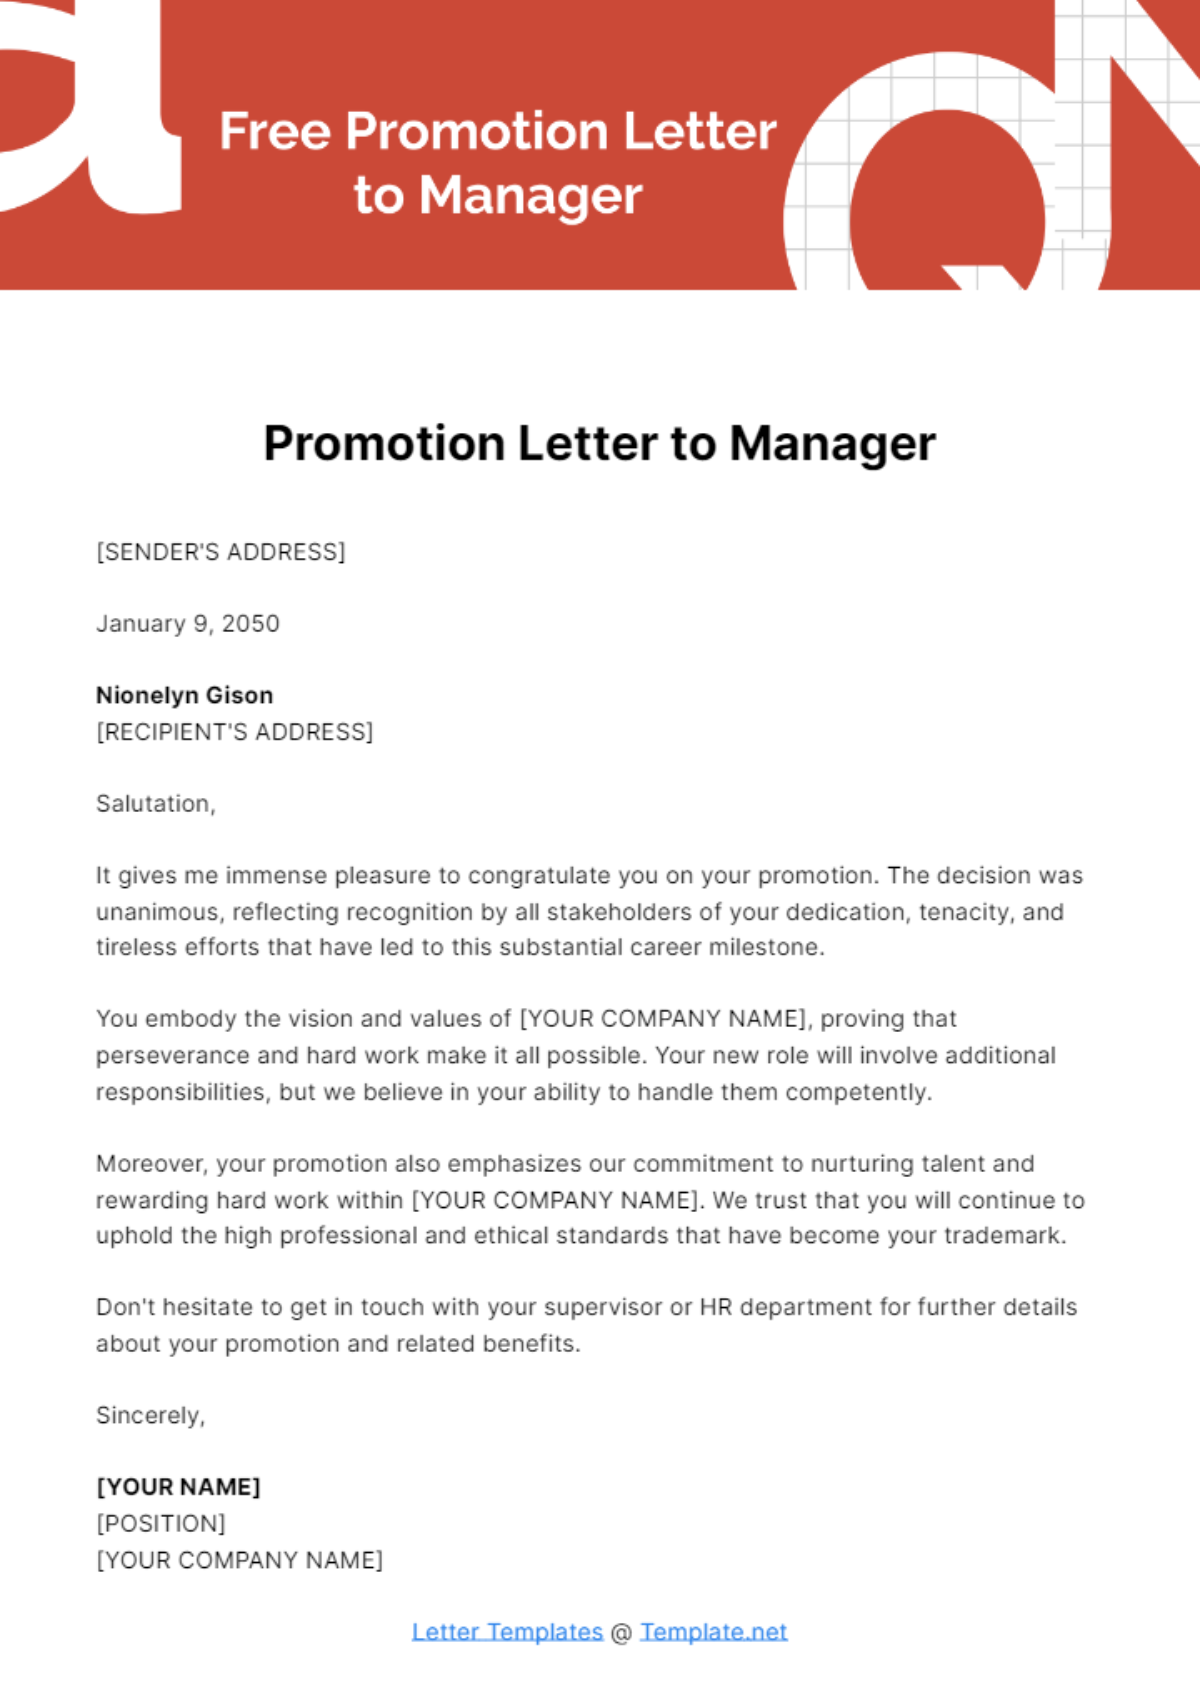 Free Promotion Letter to Manager Template